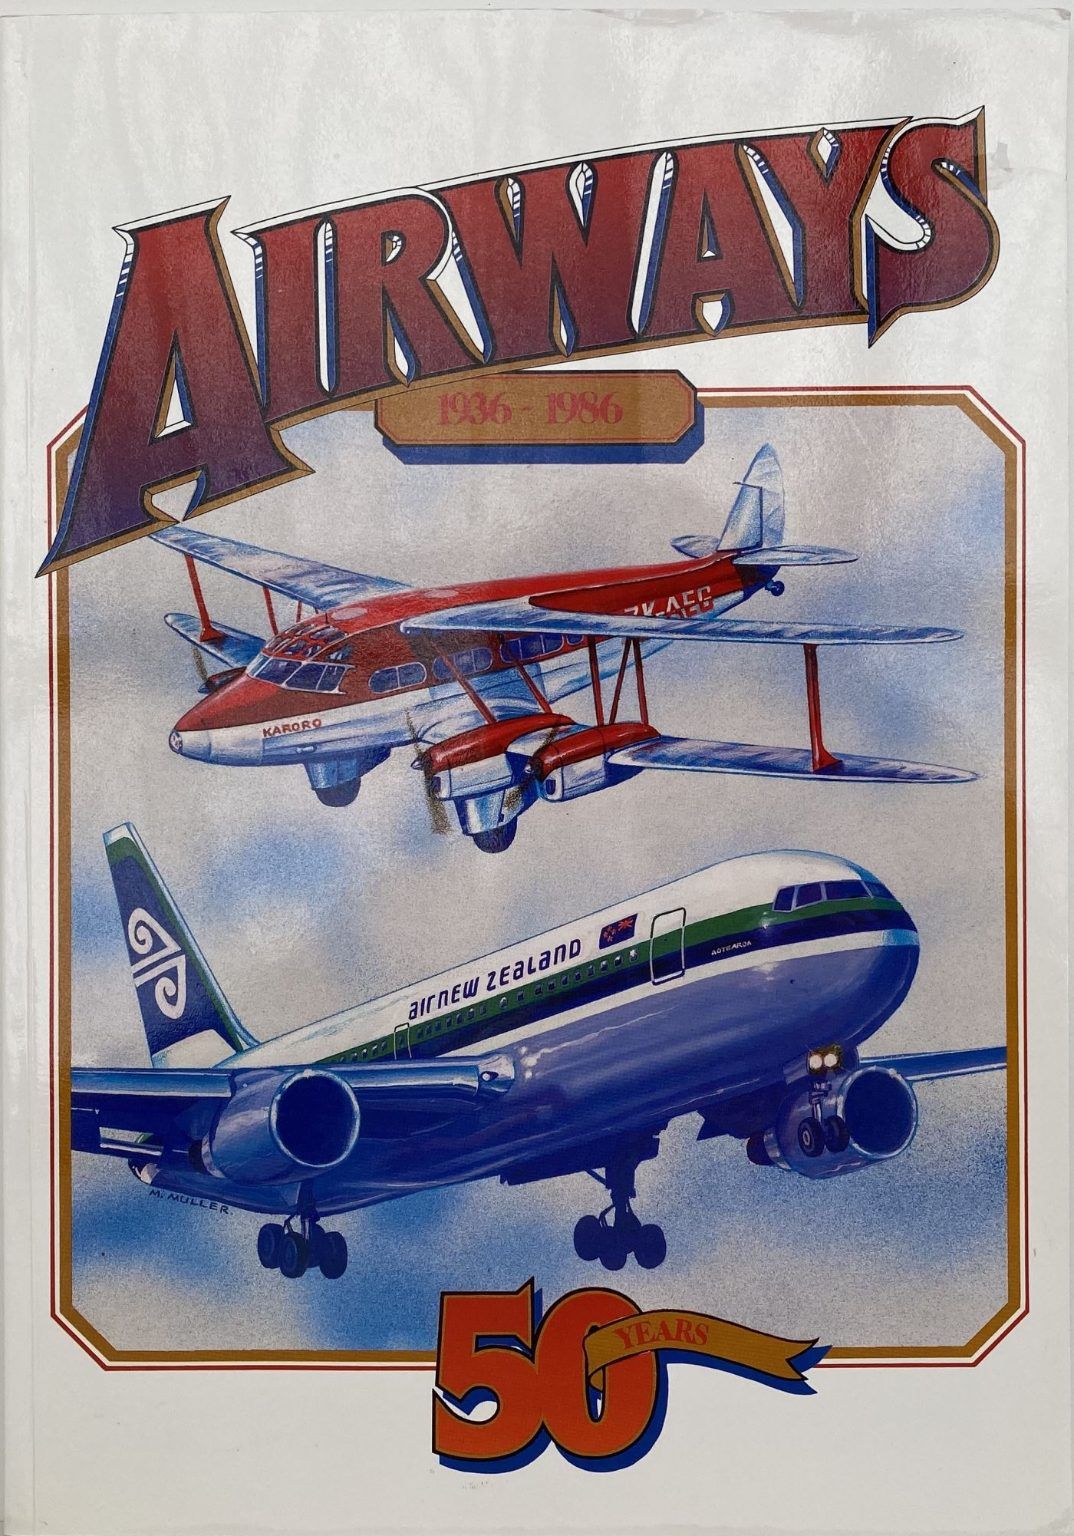 AIRWAYS: The First 50 Years 1936-1986